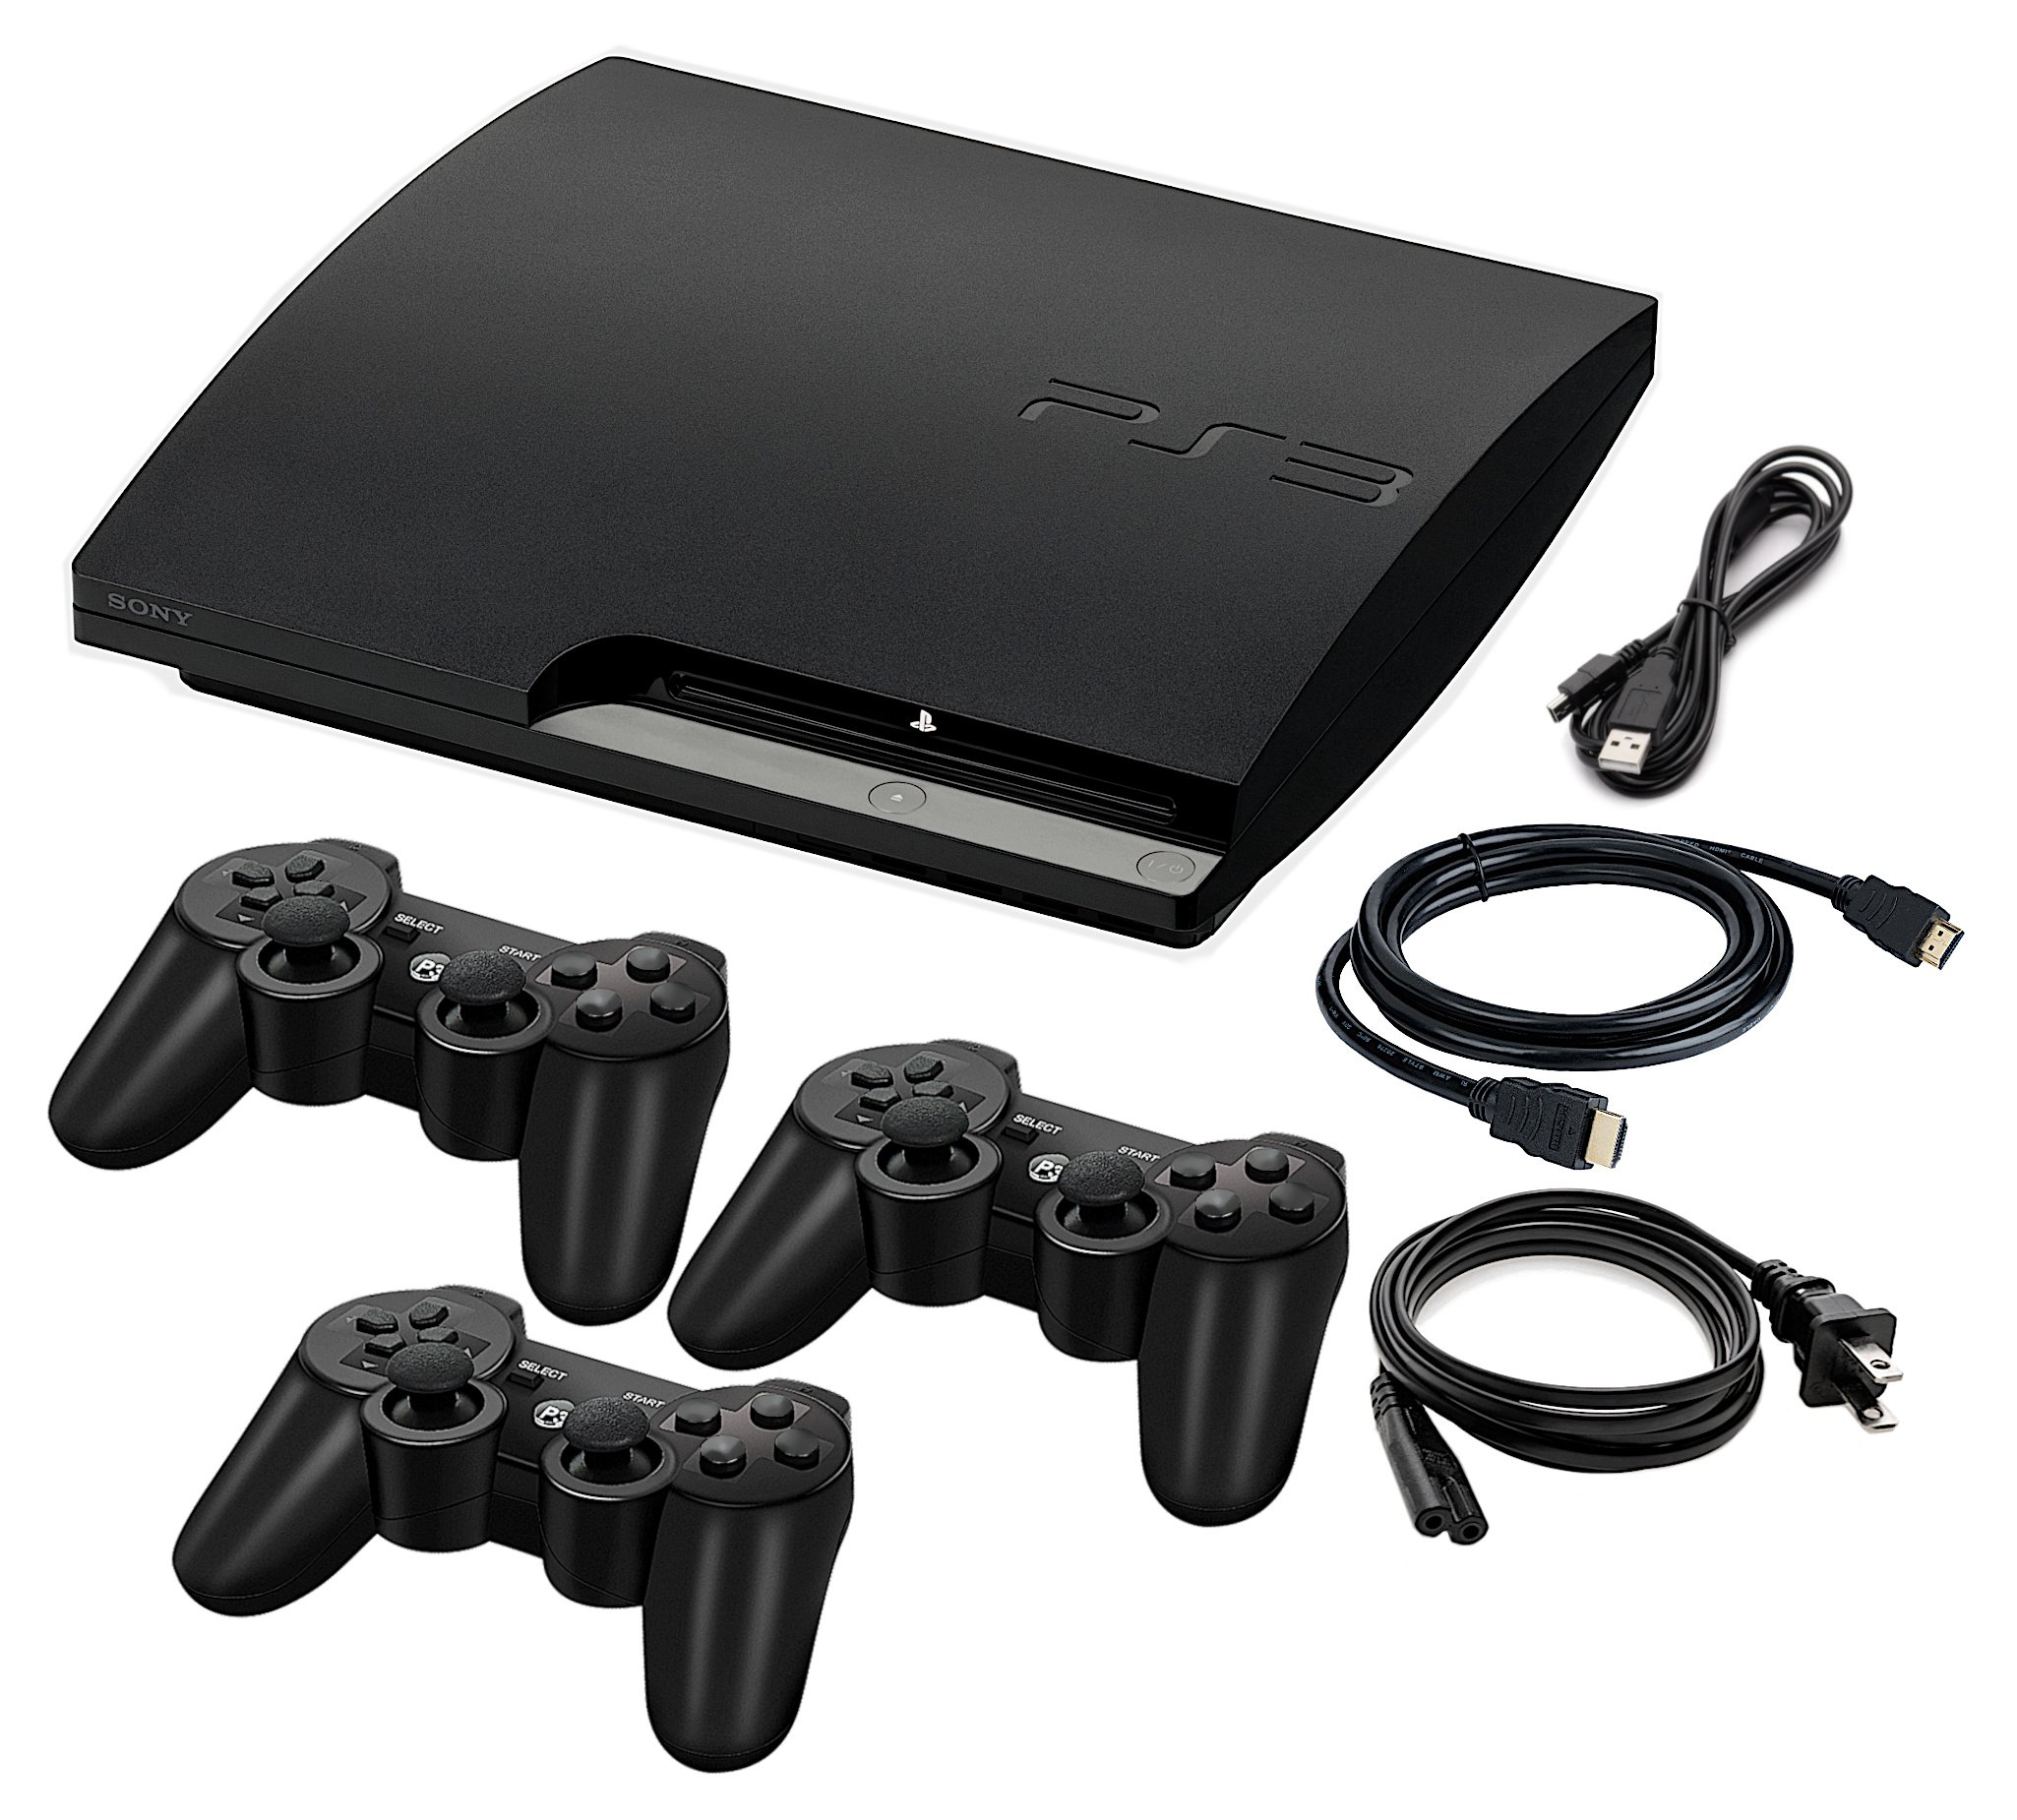 Pre-Owned Sony PlayStation 2 Fat Video Gaming Console Black With HDMI Cable  BOLT AXTION Bundle (Refurbished: Like New) 